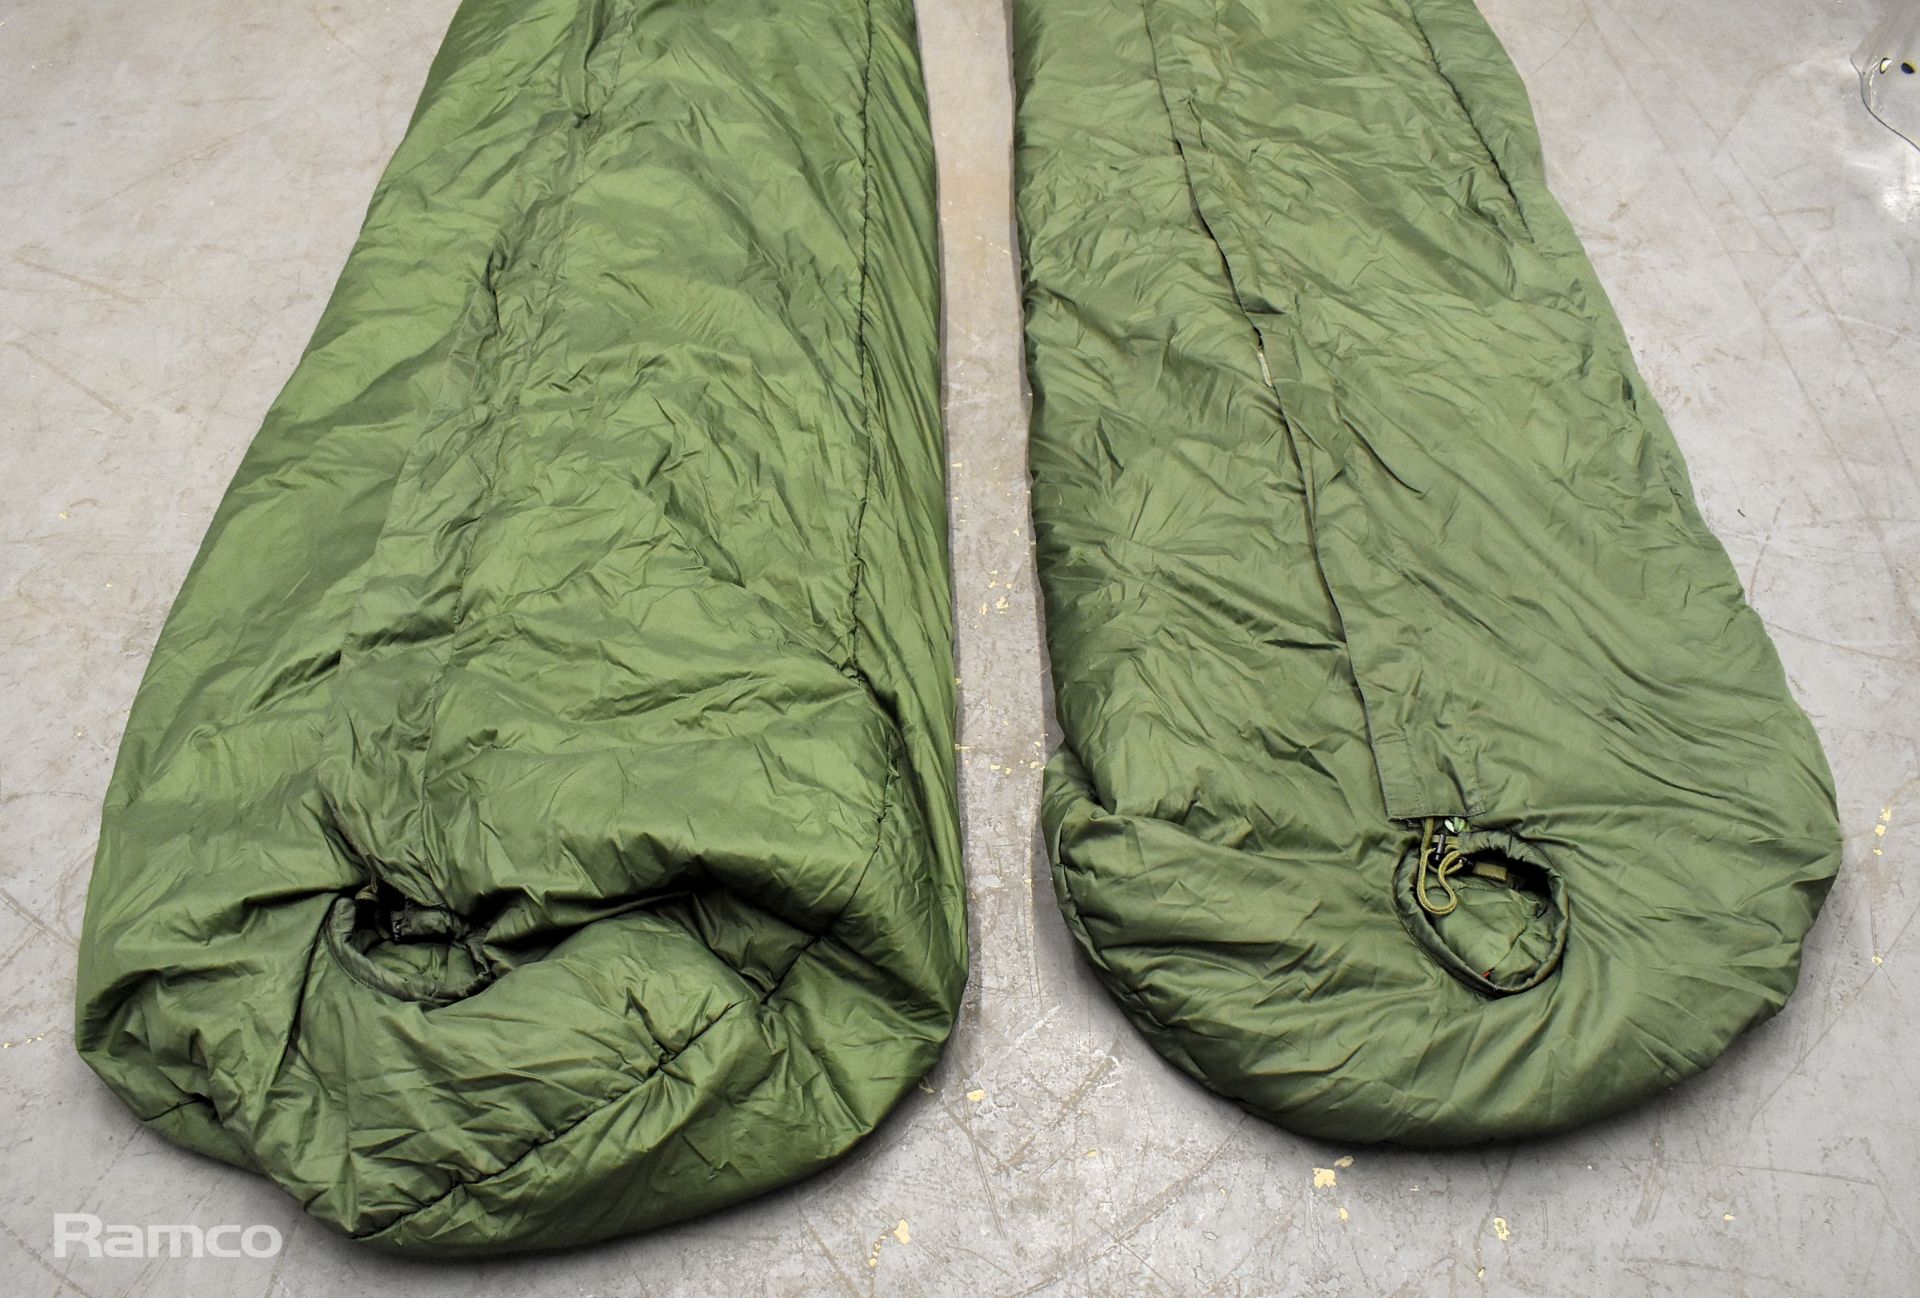 43x Sleeping bags - mixed grades and sizes - Image 5 of 8